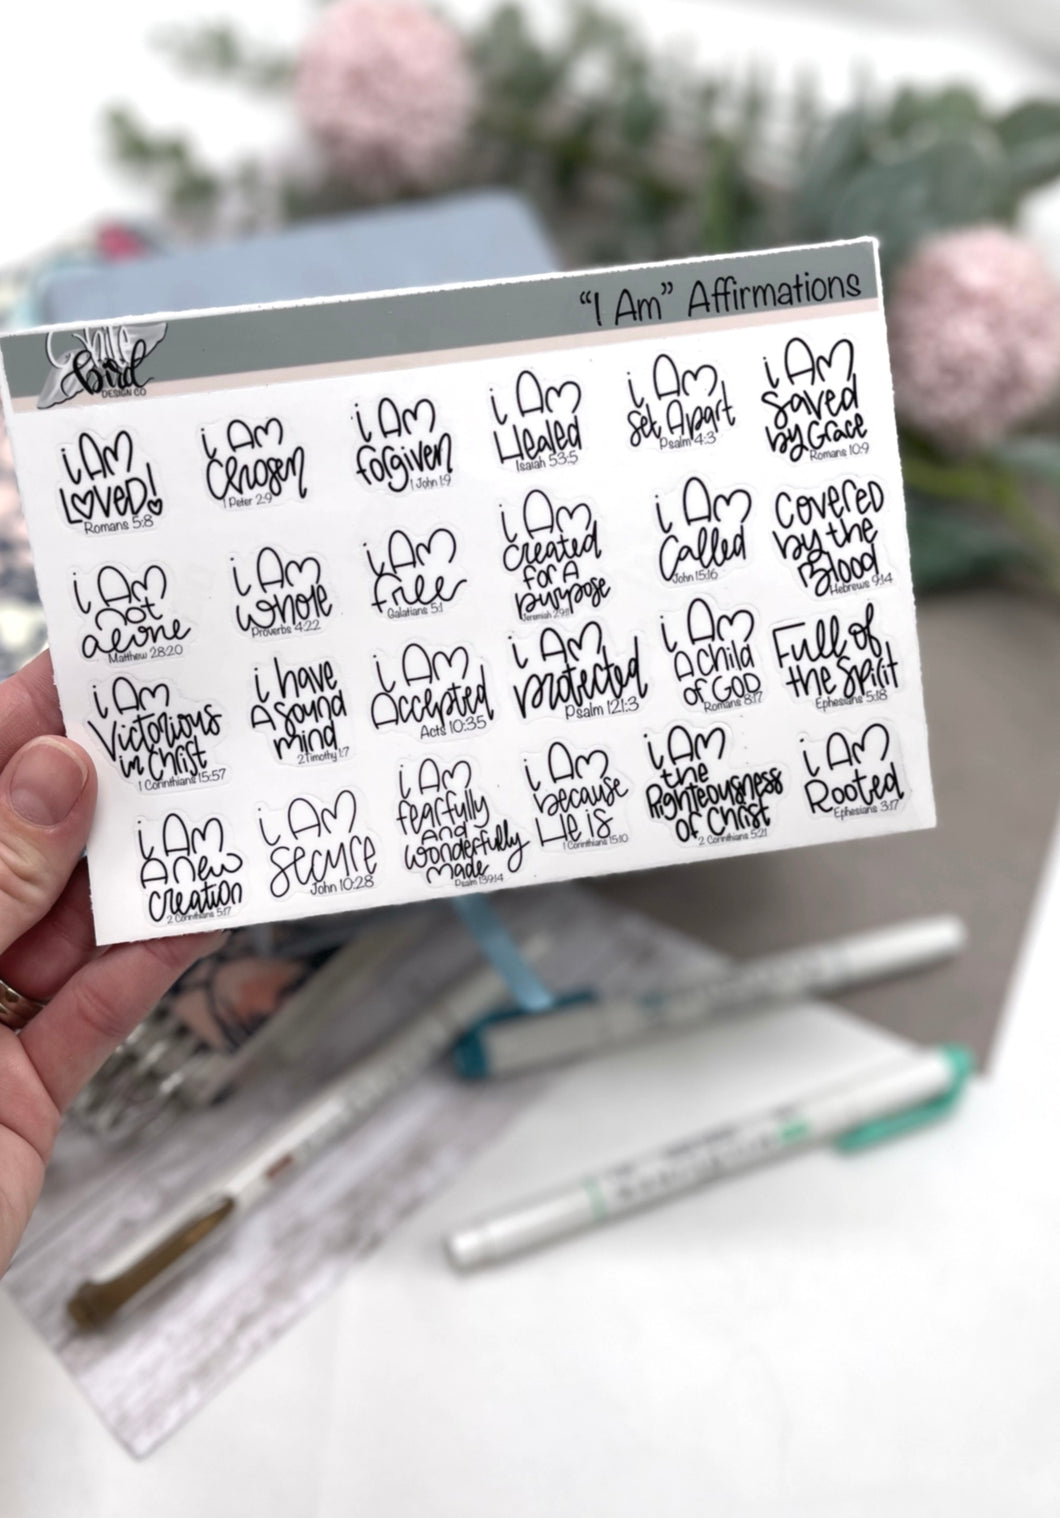 Christian Affirmation Stickers| Bible Verse Stickers|Identity in Christ Stickers